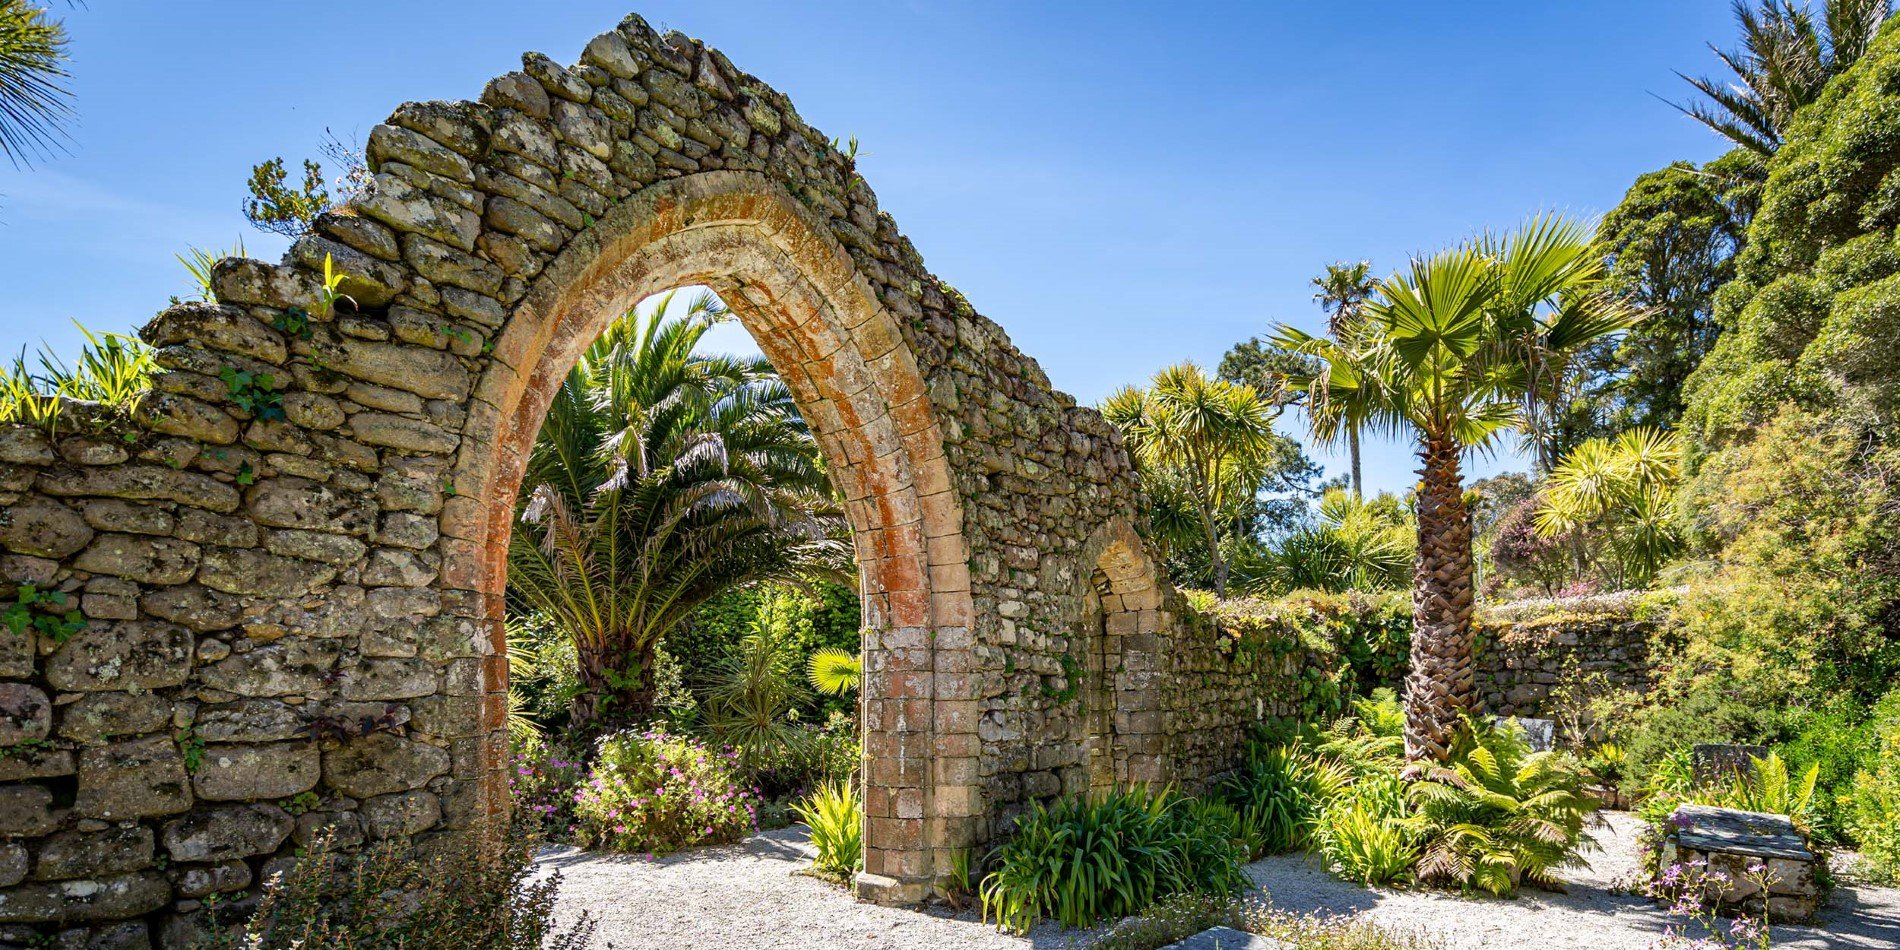 Admire the lush Tresco Abbey Gardens on the Isles of Scilly.